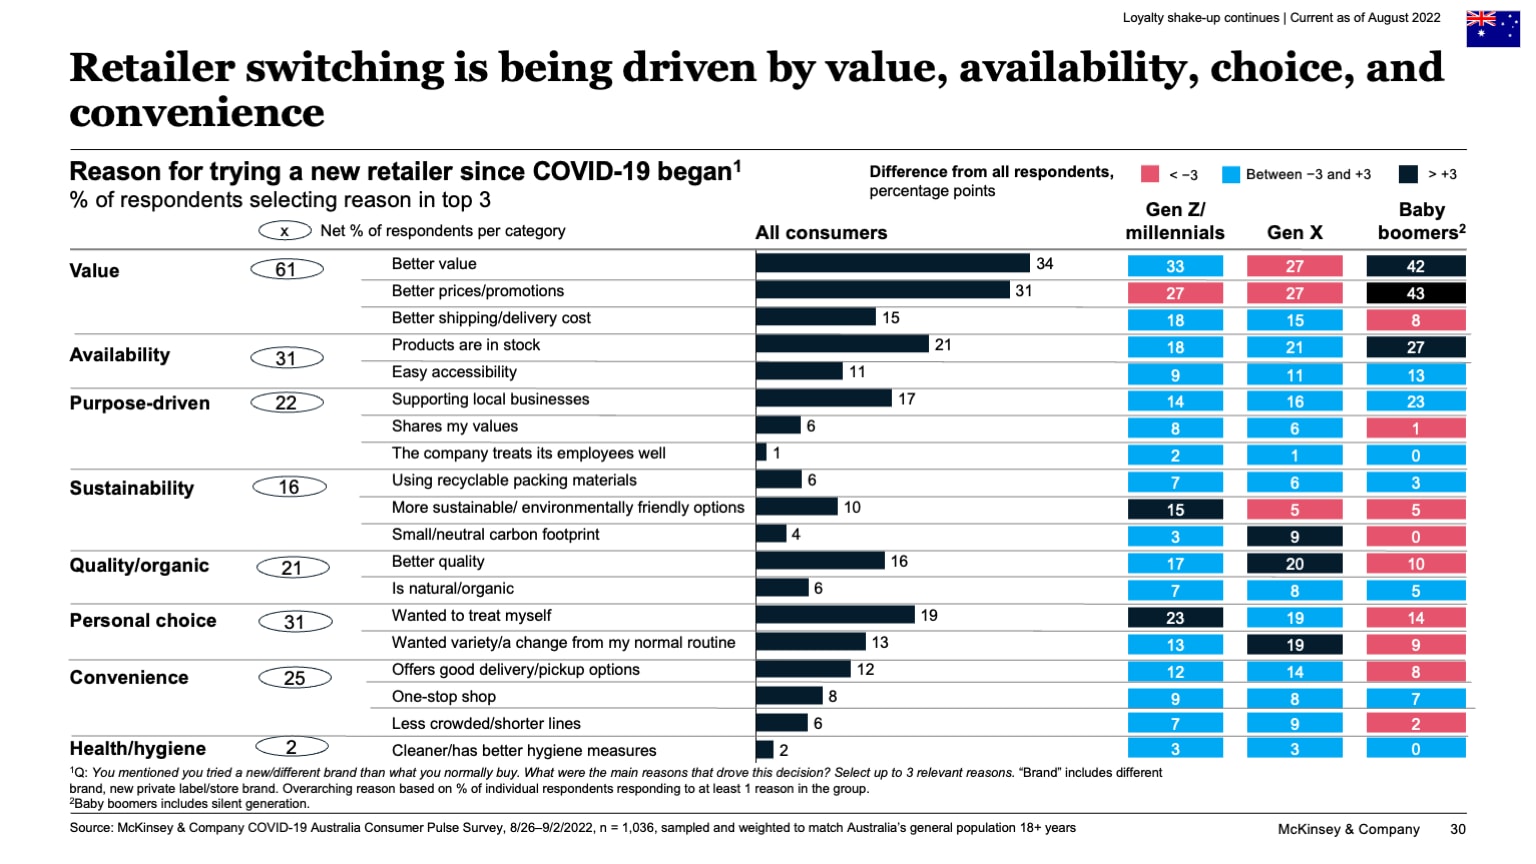 Retailer switching is being driven by value, availability, choice, and convenience